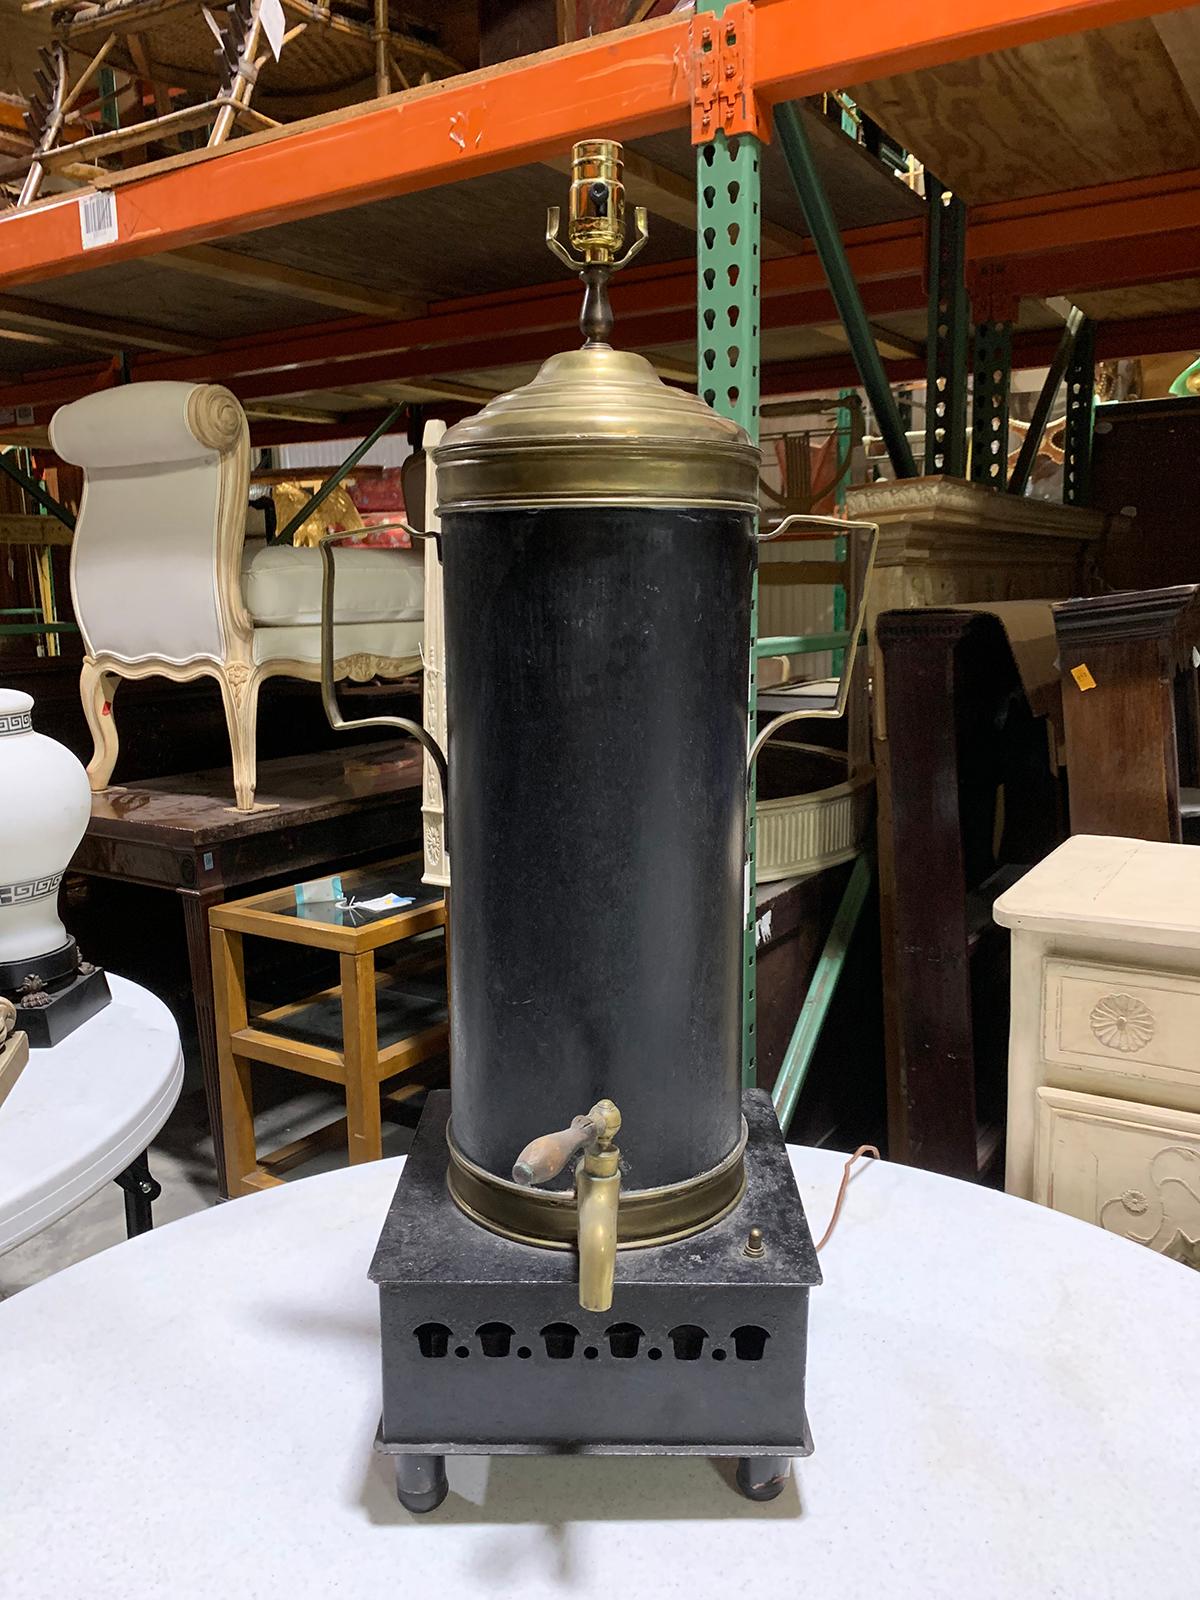 19th century tole and brass hot water urn as lamp
New wiring.